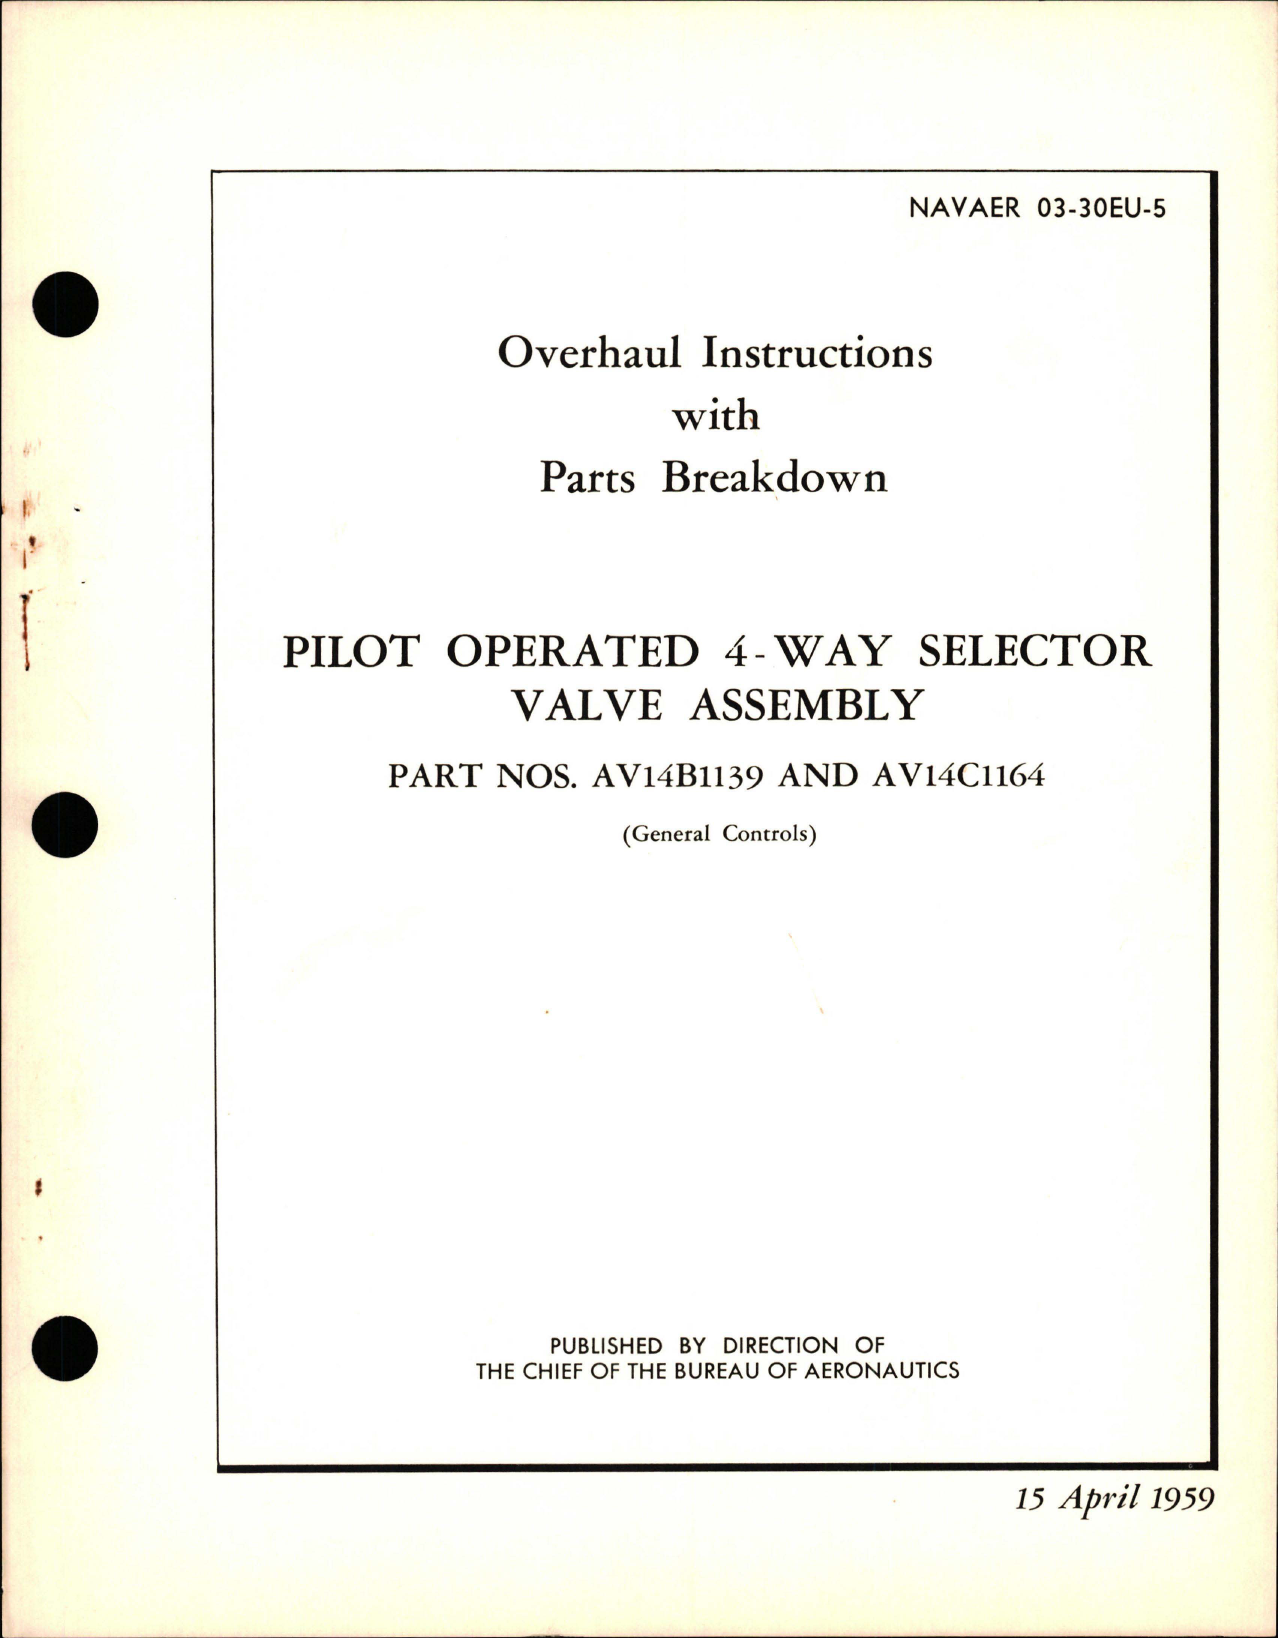 Sample page 1 from AirCorps Library document: Overhaul Instructions with Parts Breakdown for Pilot Operated 4-Way Selector Valve Assembly - Parts AV14B1139 and AV14C1164 